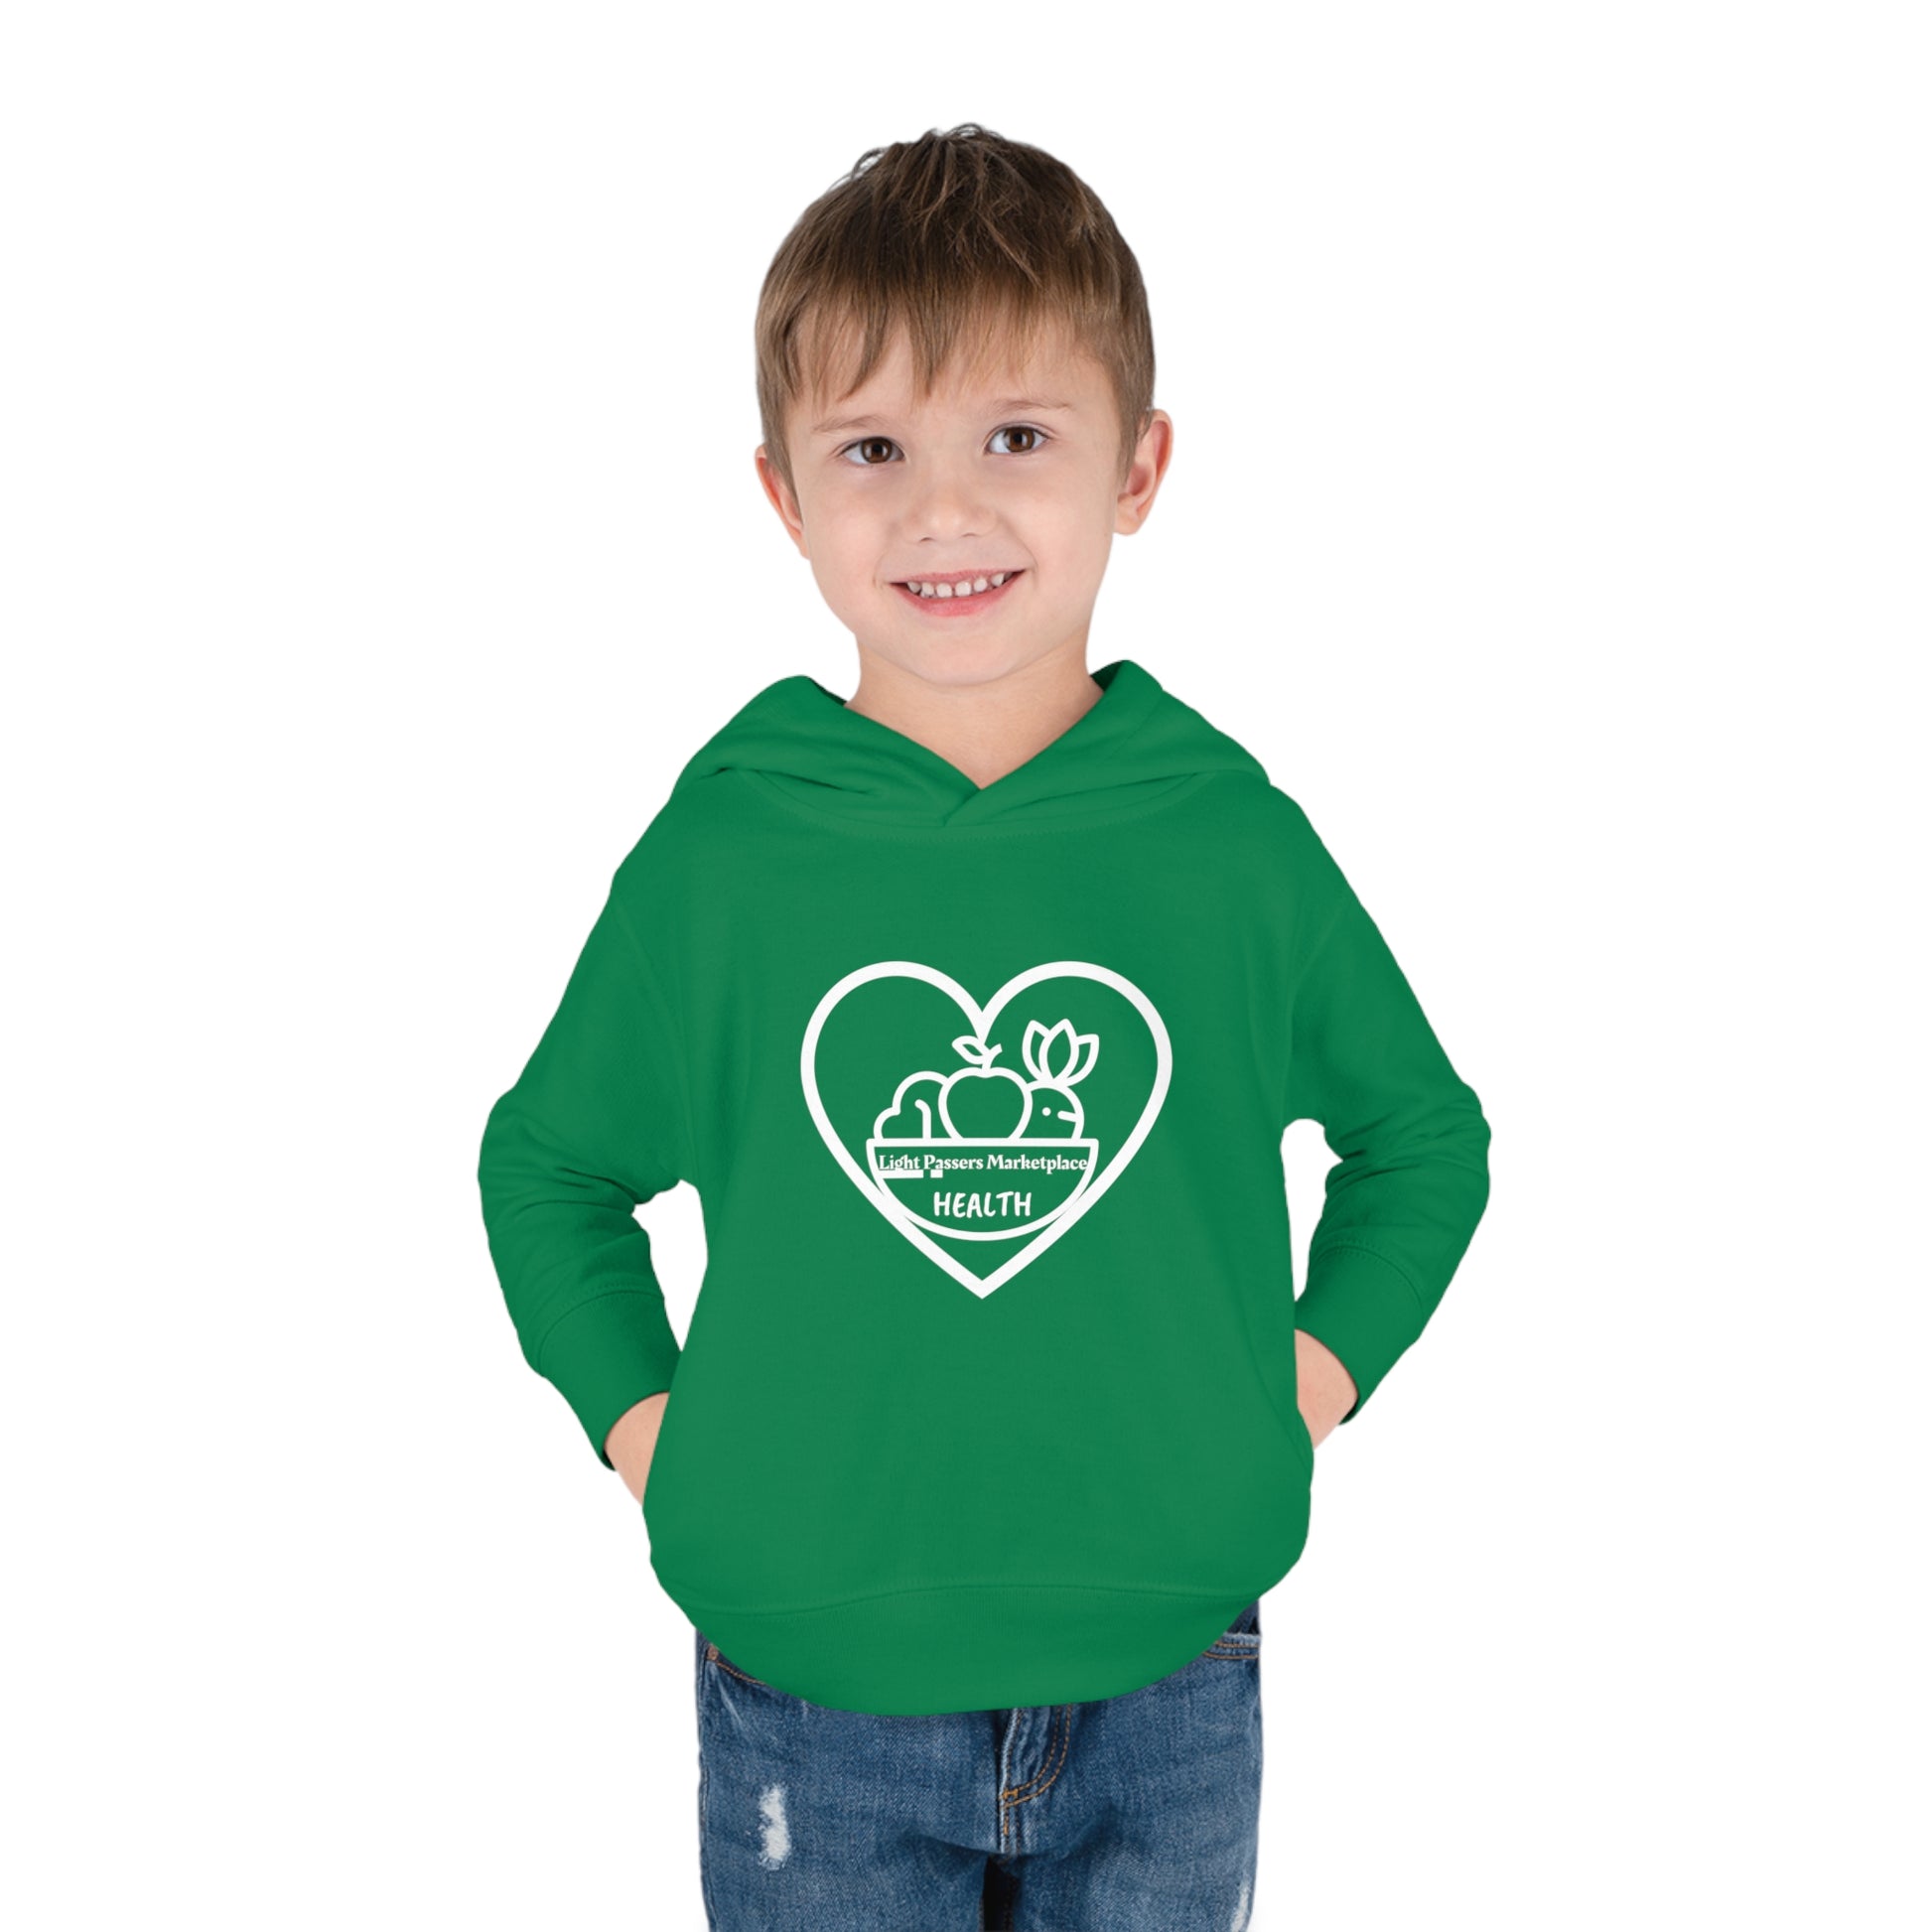 A toddler wearing a green Fruit Basket Toddler Hoodie with a heart and logo, featuring side seam pockets and double-needle hemmed details for durability and comfort.